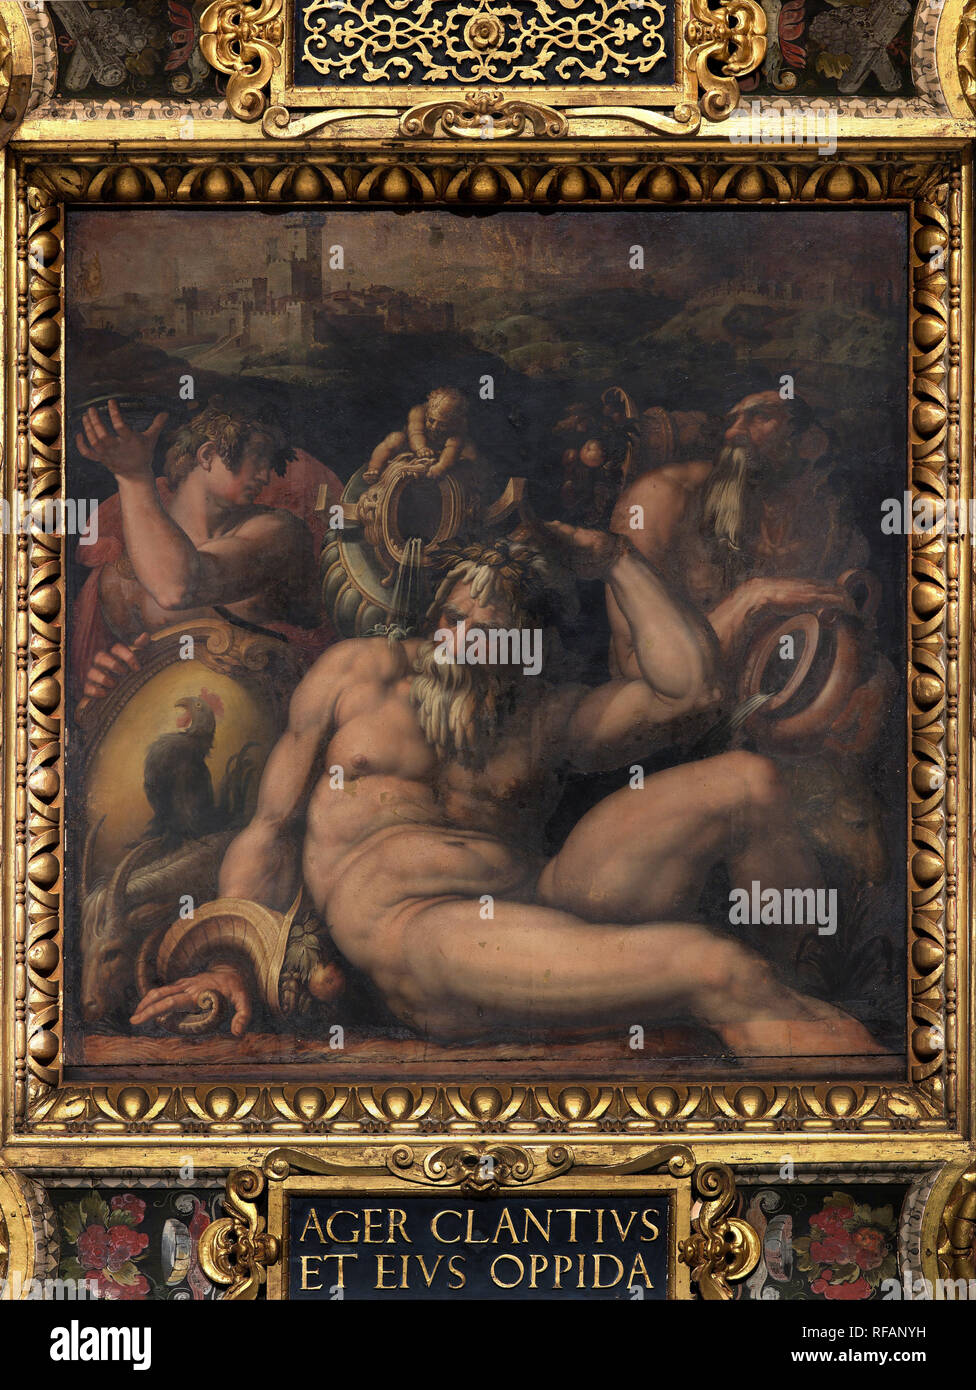 Allegory of Chianti. Date/Period: 1563 - 1565. Oil painting on wood. Height: 250 mm (9.84 in); Width: 250 mm (9.84 in). Author: Giorgio Vasari. VASARI, GIORGIO. Stock Photo